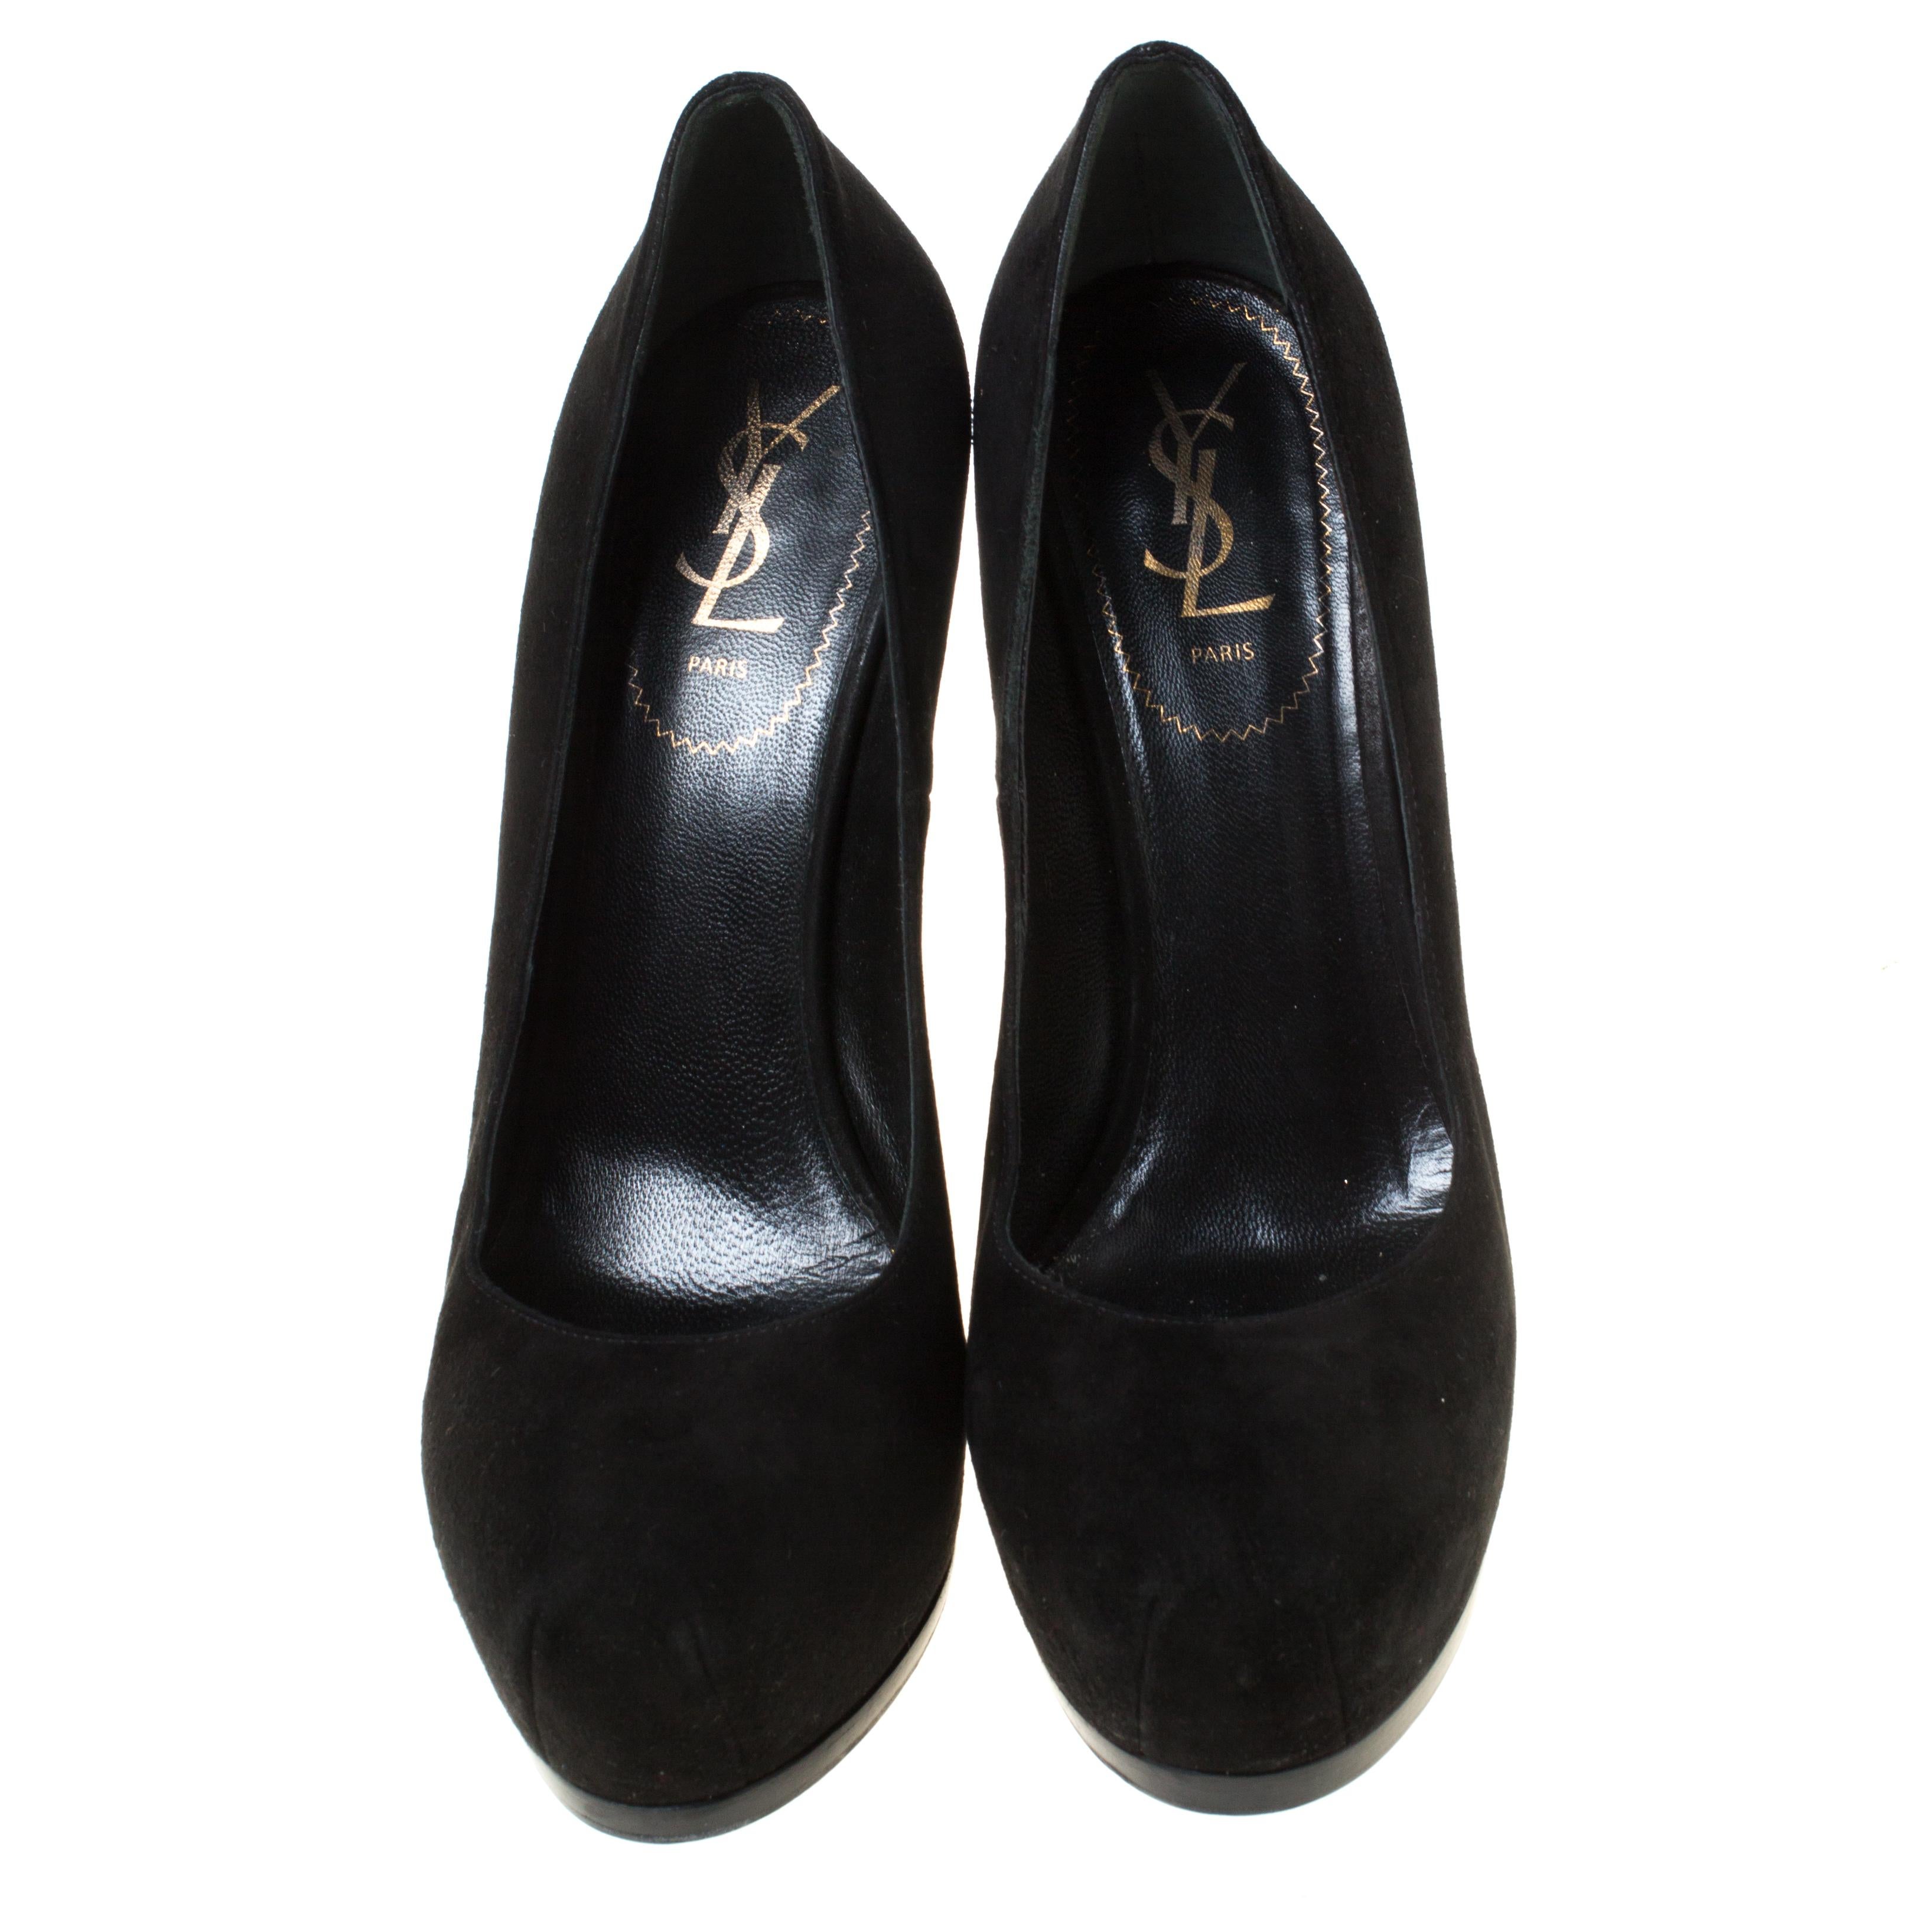 Fashionable and chic, these Tribtoo pumps from Saint Laurent will cut an alluring silhouette from day to night. Crafted from suede, the pumps have a black shade, concealed platforms, and 15.5 cm heels.

Includes: The Luxury Closet Packaging

